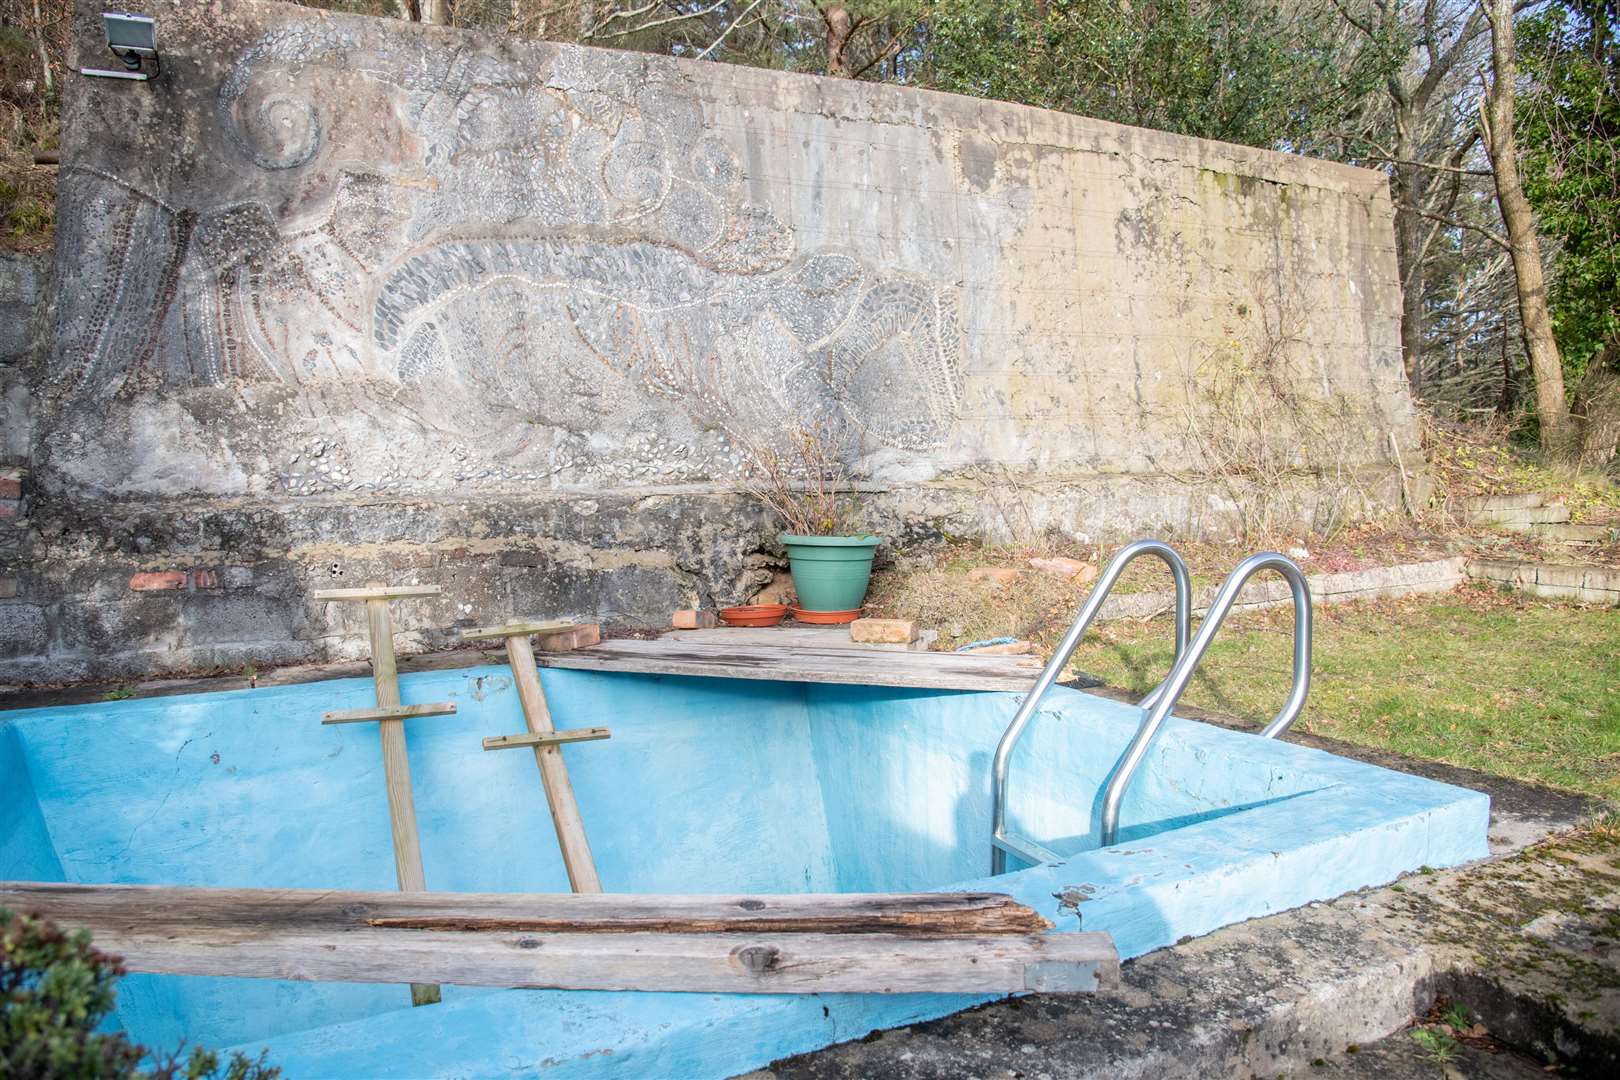 The outdoor plunge pool and mosaic.